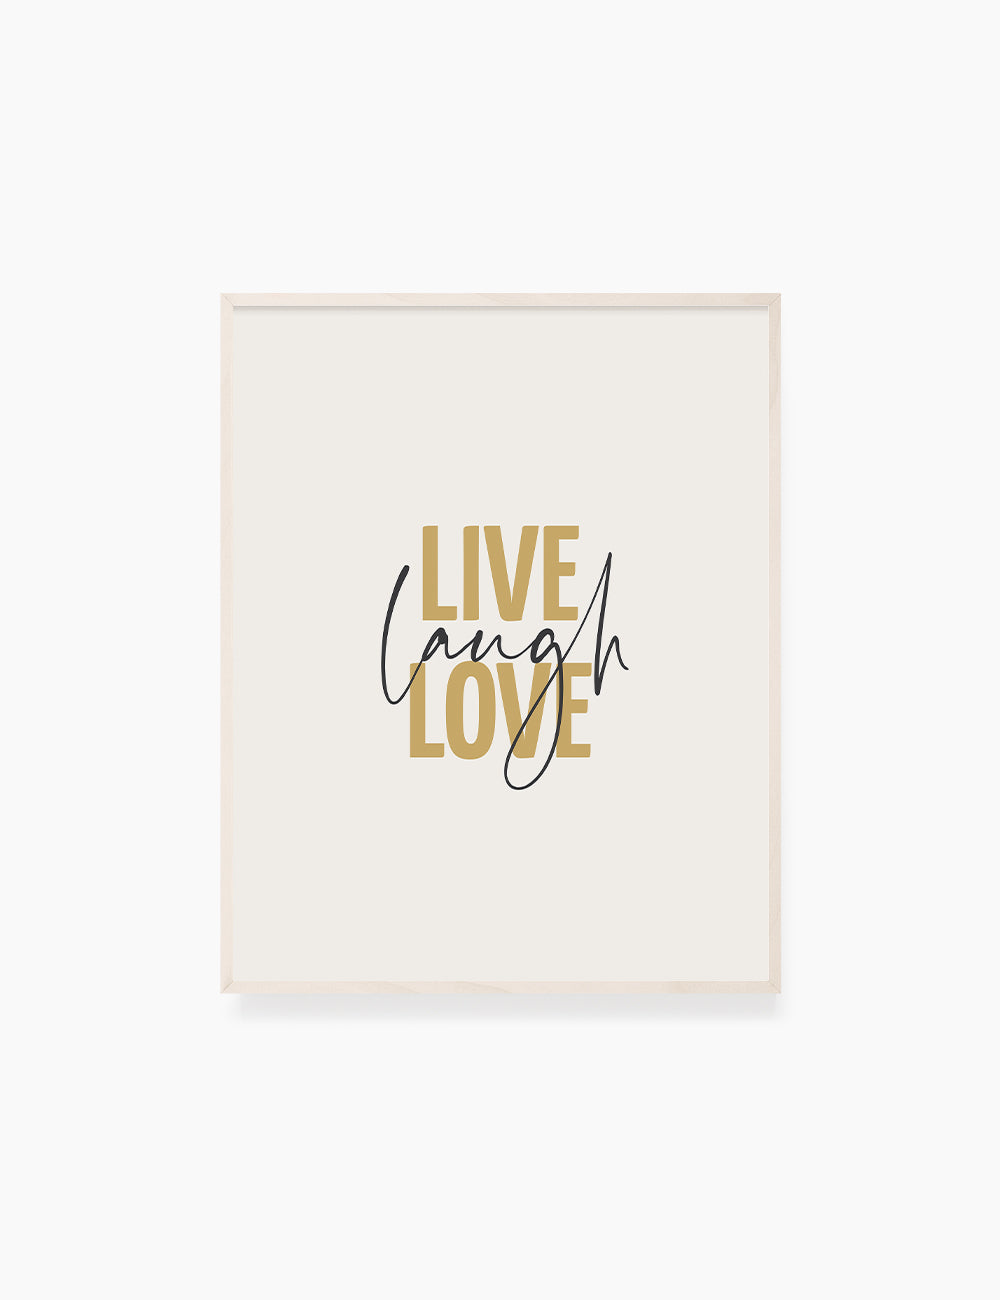 Design Wall LAUGH. & Art MOON PAPER Printable – quote. Inspirational Beige. Gold. LOVE. Yellow Quote. LIVE. Art